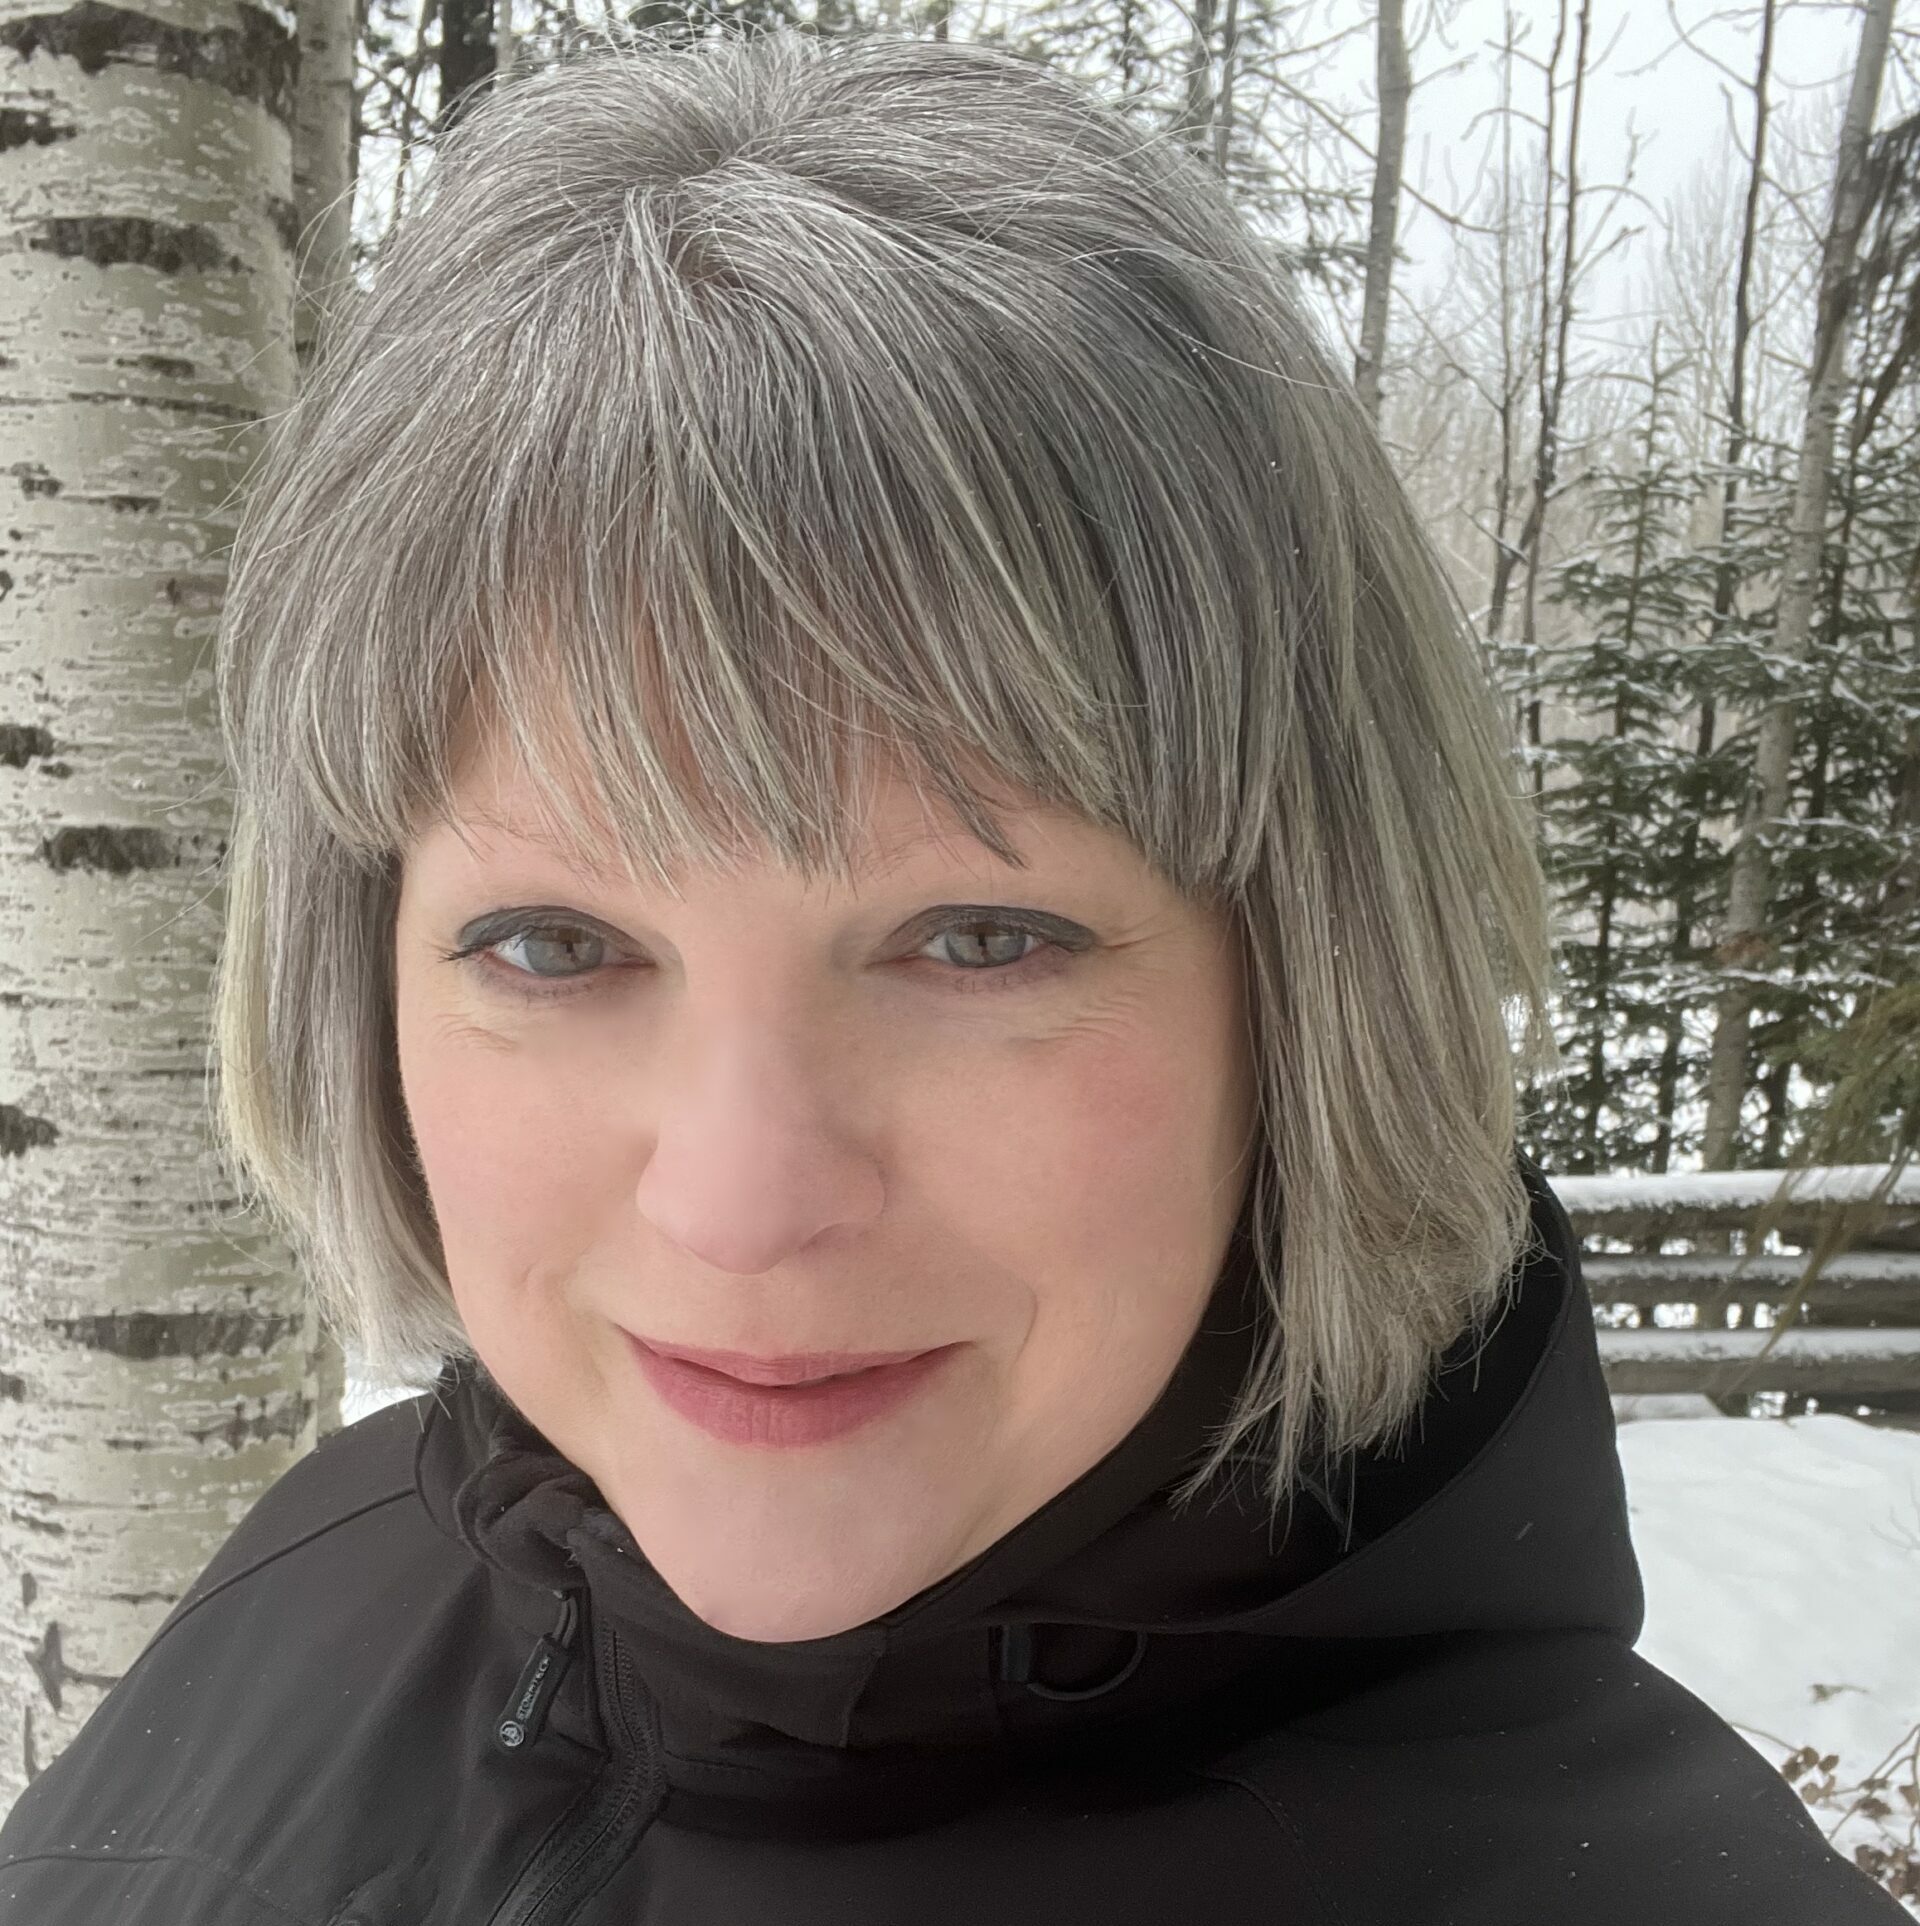 headshot of smiling grey haired woman wearing a black jacket that has "Barkerville" embroidered on the chest standing outside in the woods.